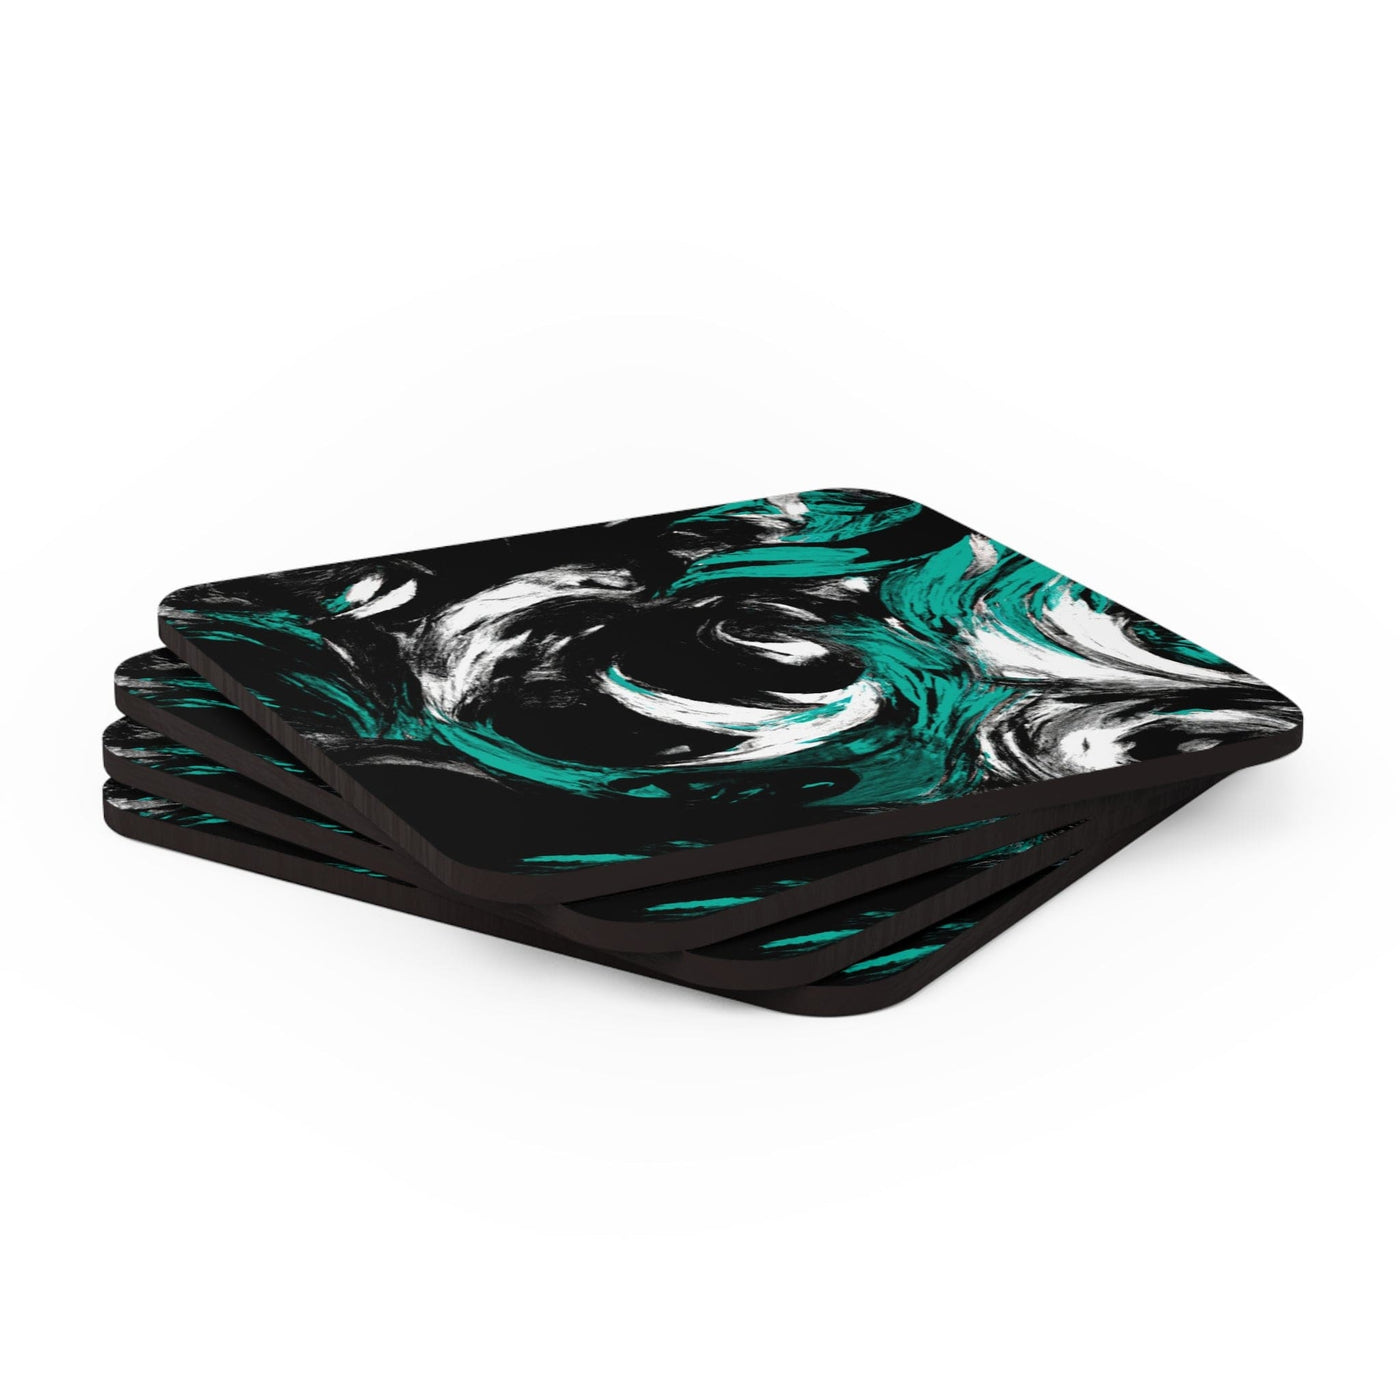 Coaster Set Of 4 For Drinks Black Green White Abstract Pattern - Decorative